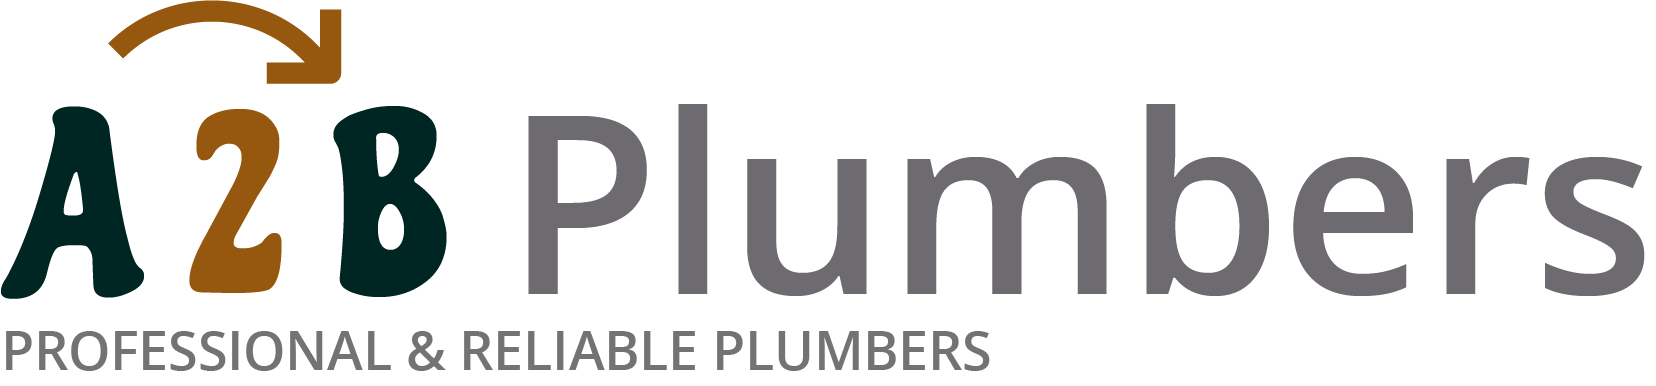 If you need a boiler installed, a radiator repaired or a leaking tap fixed, call us now - we provide services for properties in Rushden and the local area.